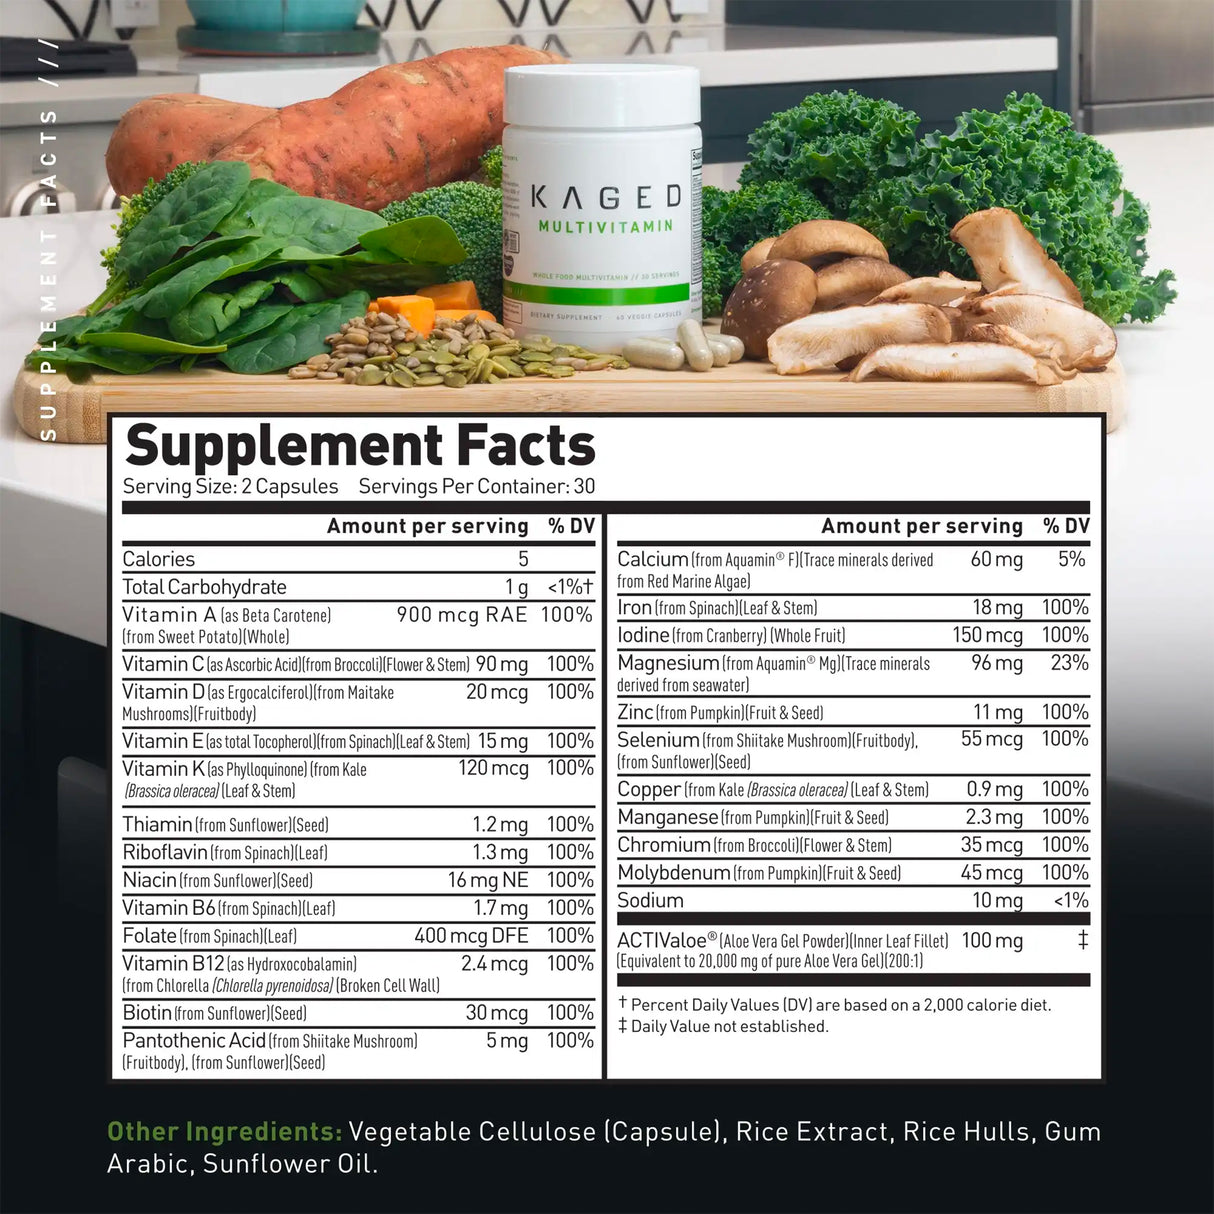 Kaged multivitamin | Nutrition facts |30 servings | gym supplements u.s